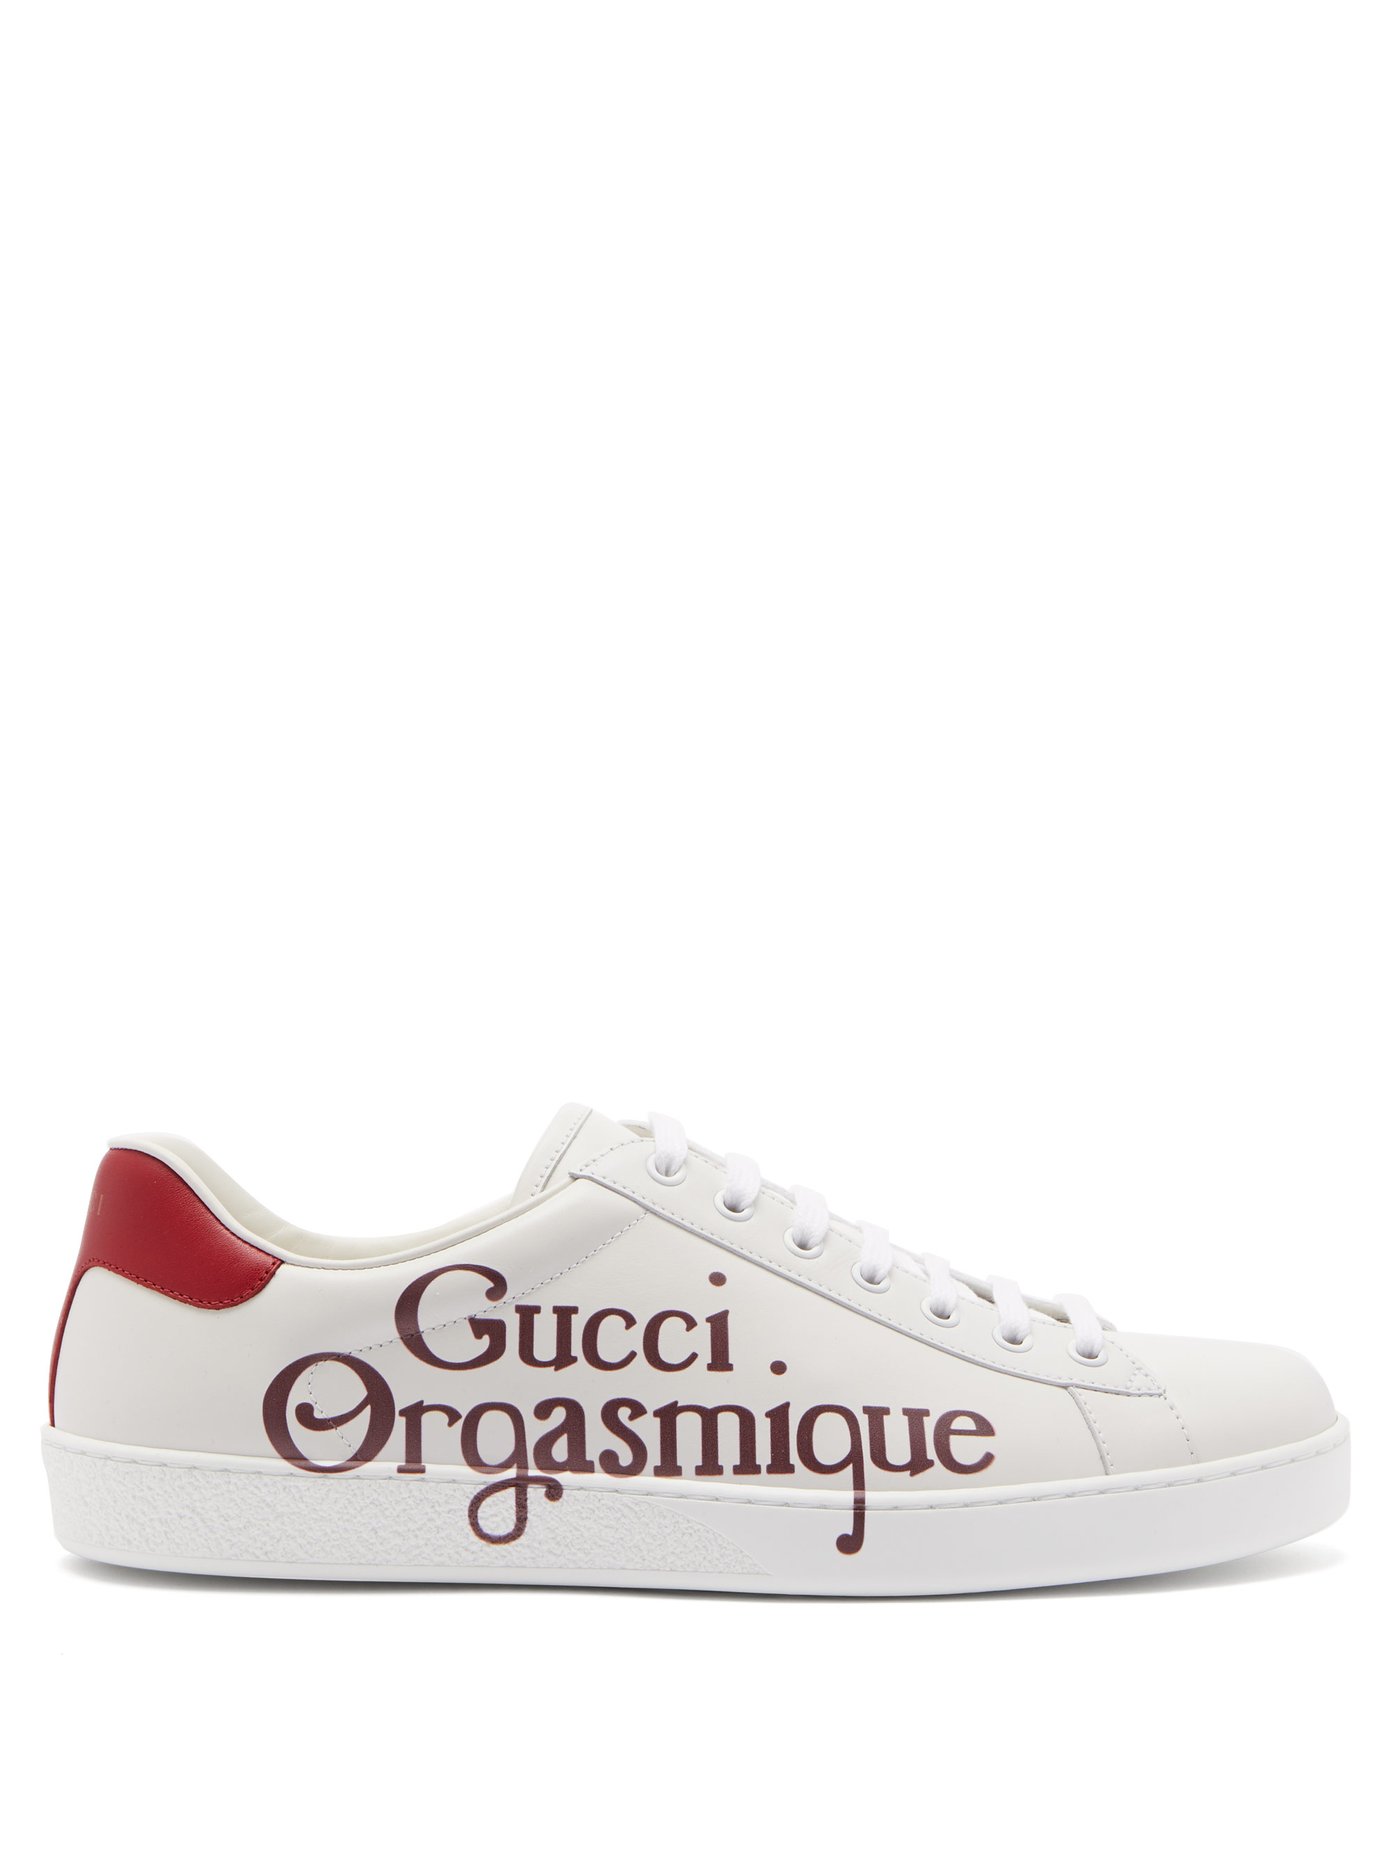 Orgasmique-print leather trainers 